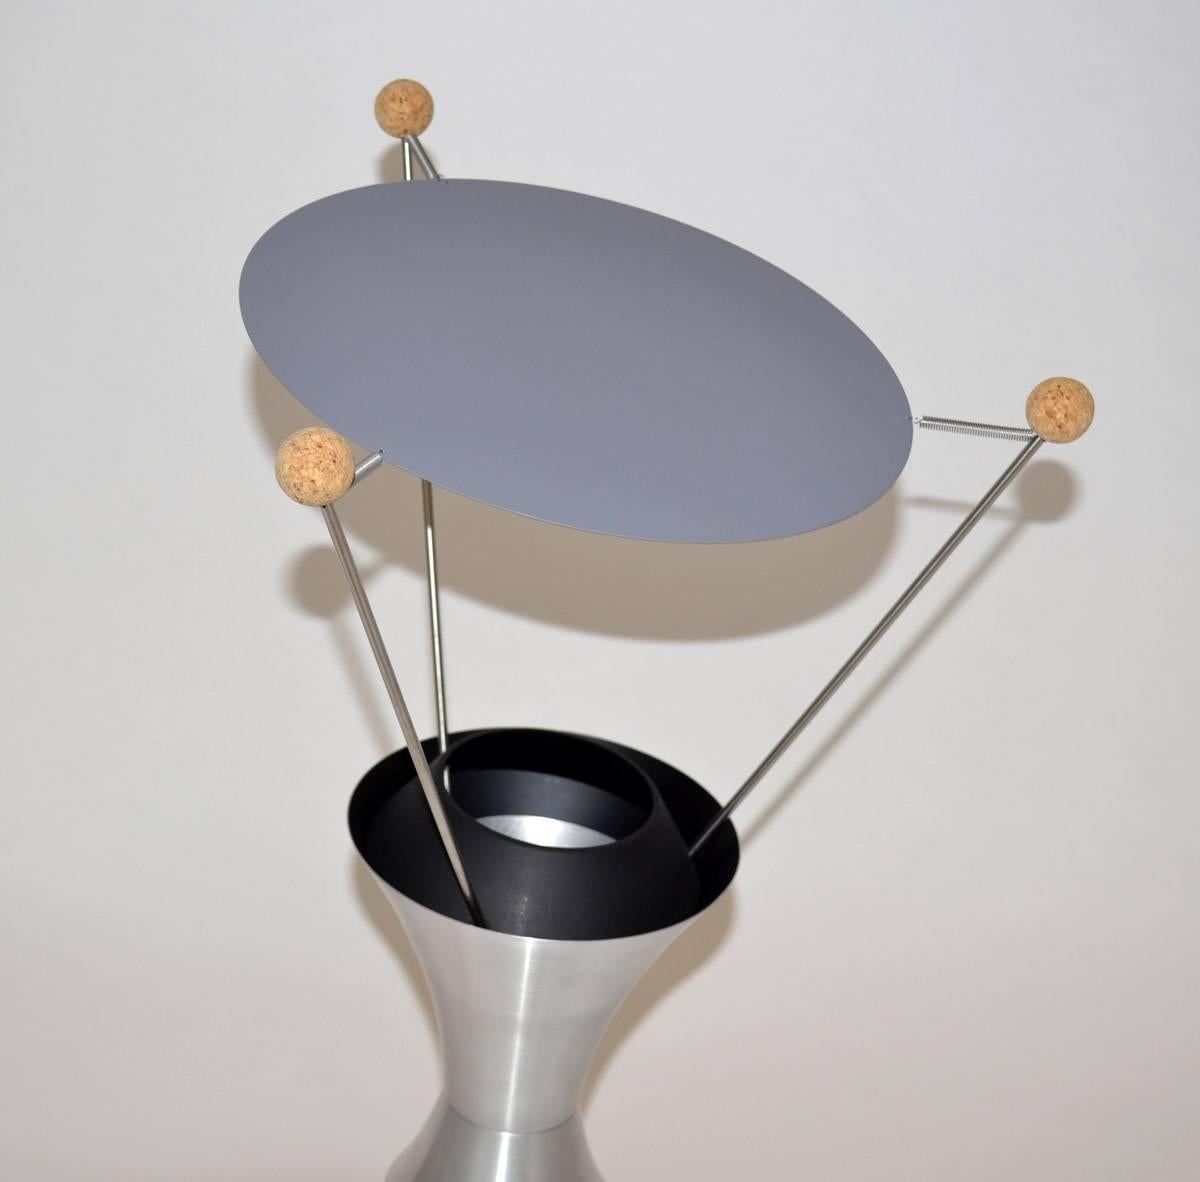 Atomic Mid-Century by James Harvey Crate T-3-C adjustable table lamp reissue of the 1951 MOMA winner of low cost lighting design. Signed and numbered no. 20, circa 2000. Aluminium, cork, wire, enameled metal.